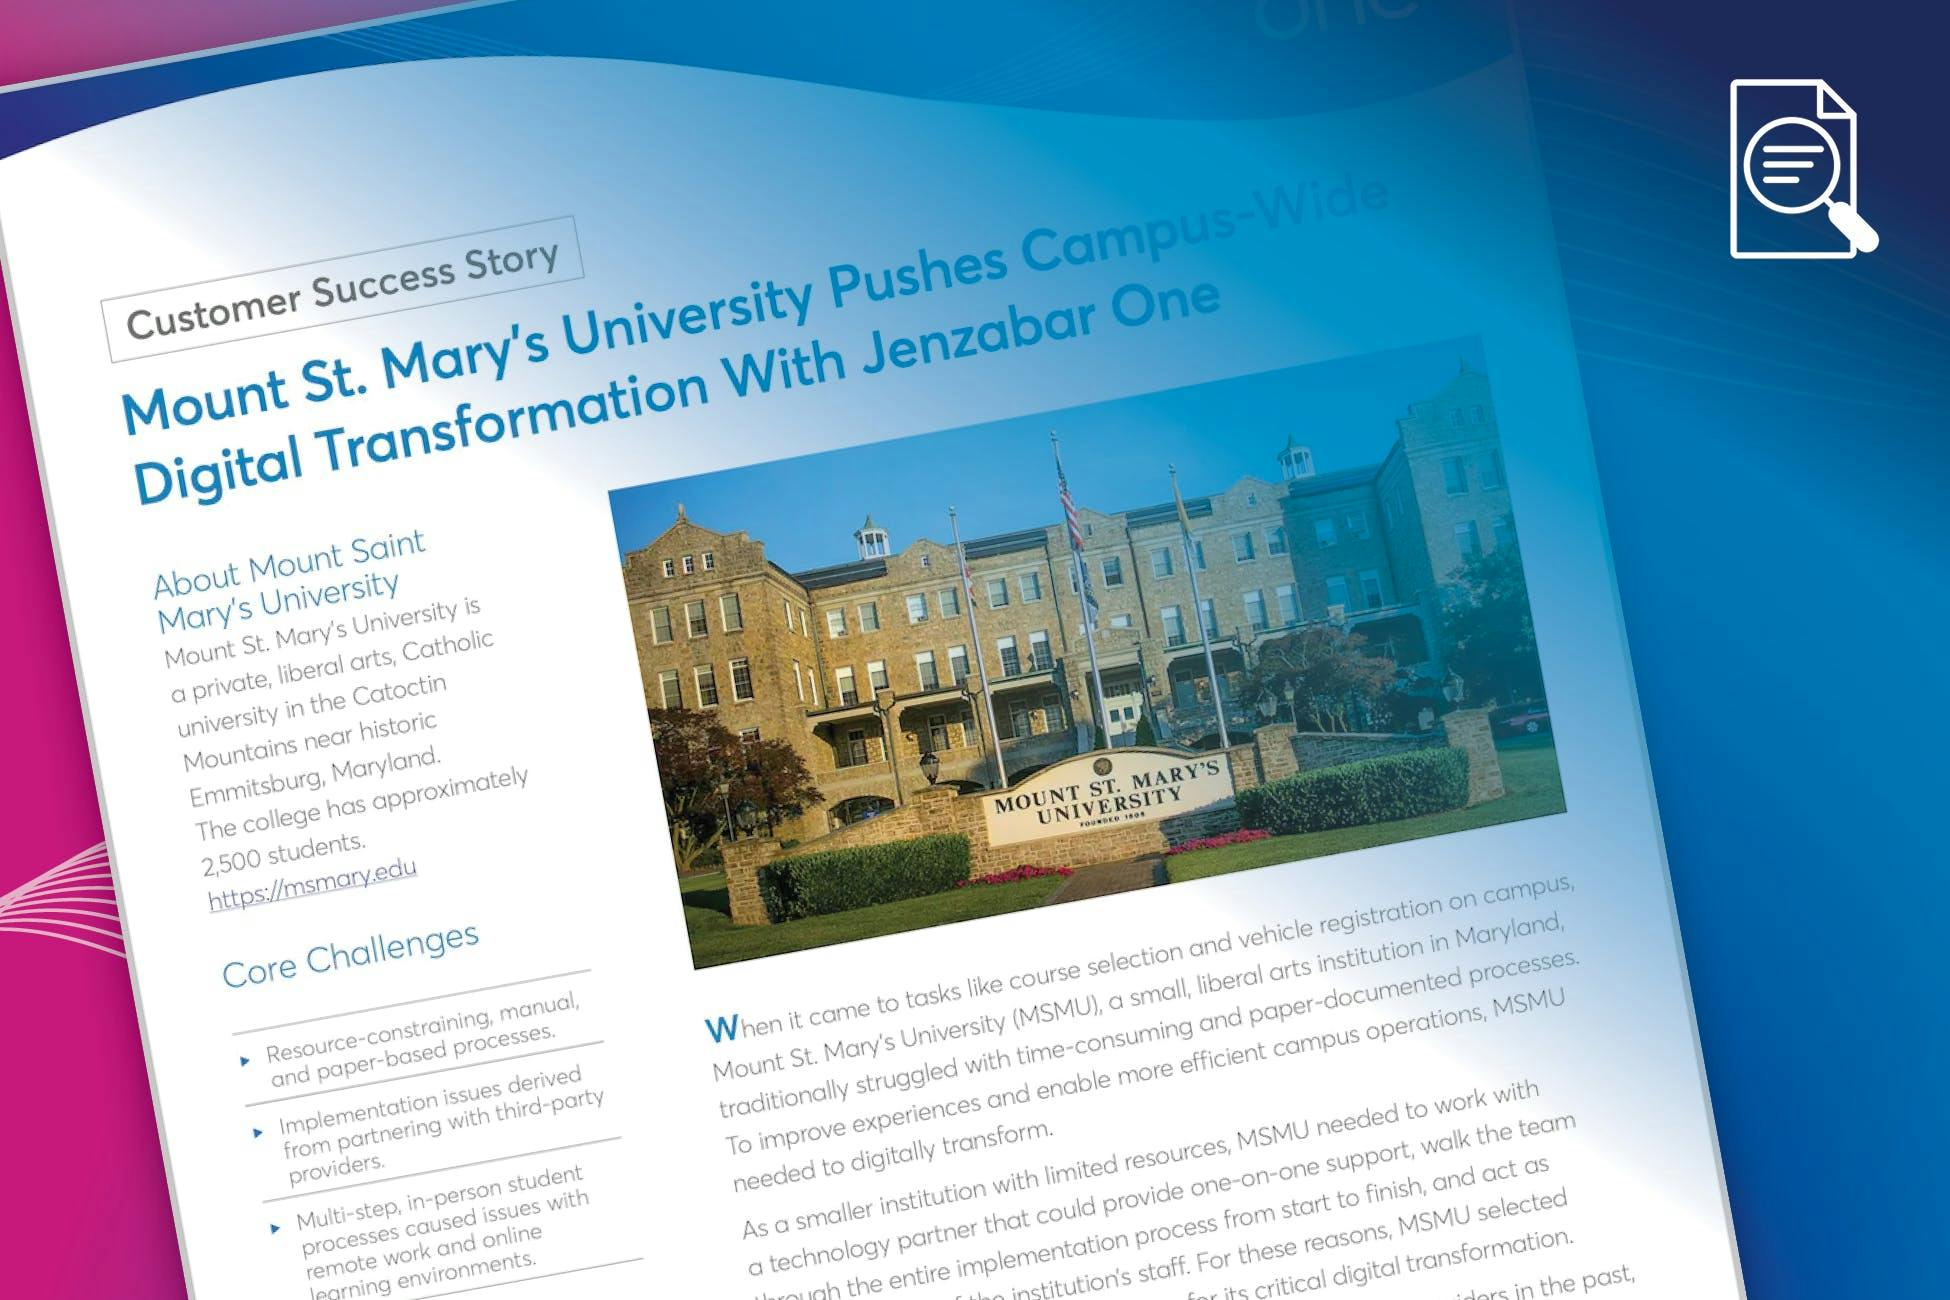 Success Story: Mount St. Mary's University Pushes Campus-Wide Digital Transformation With Jenzabar One